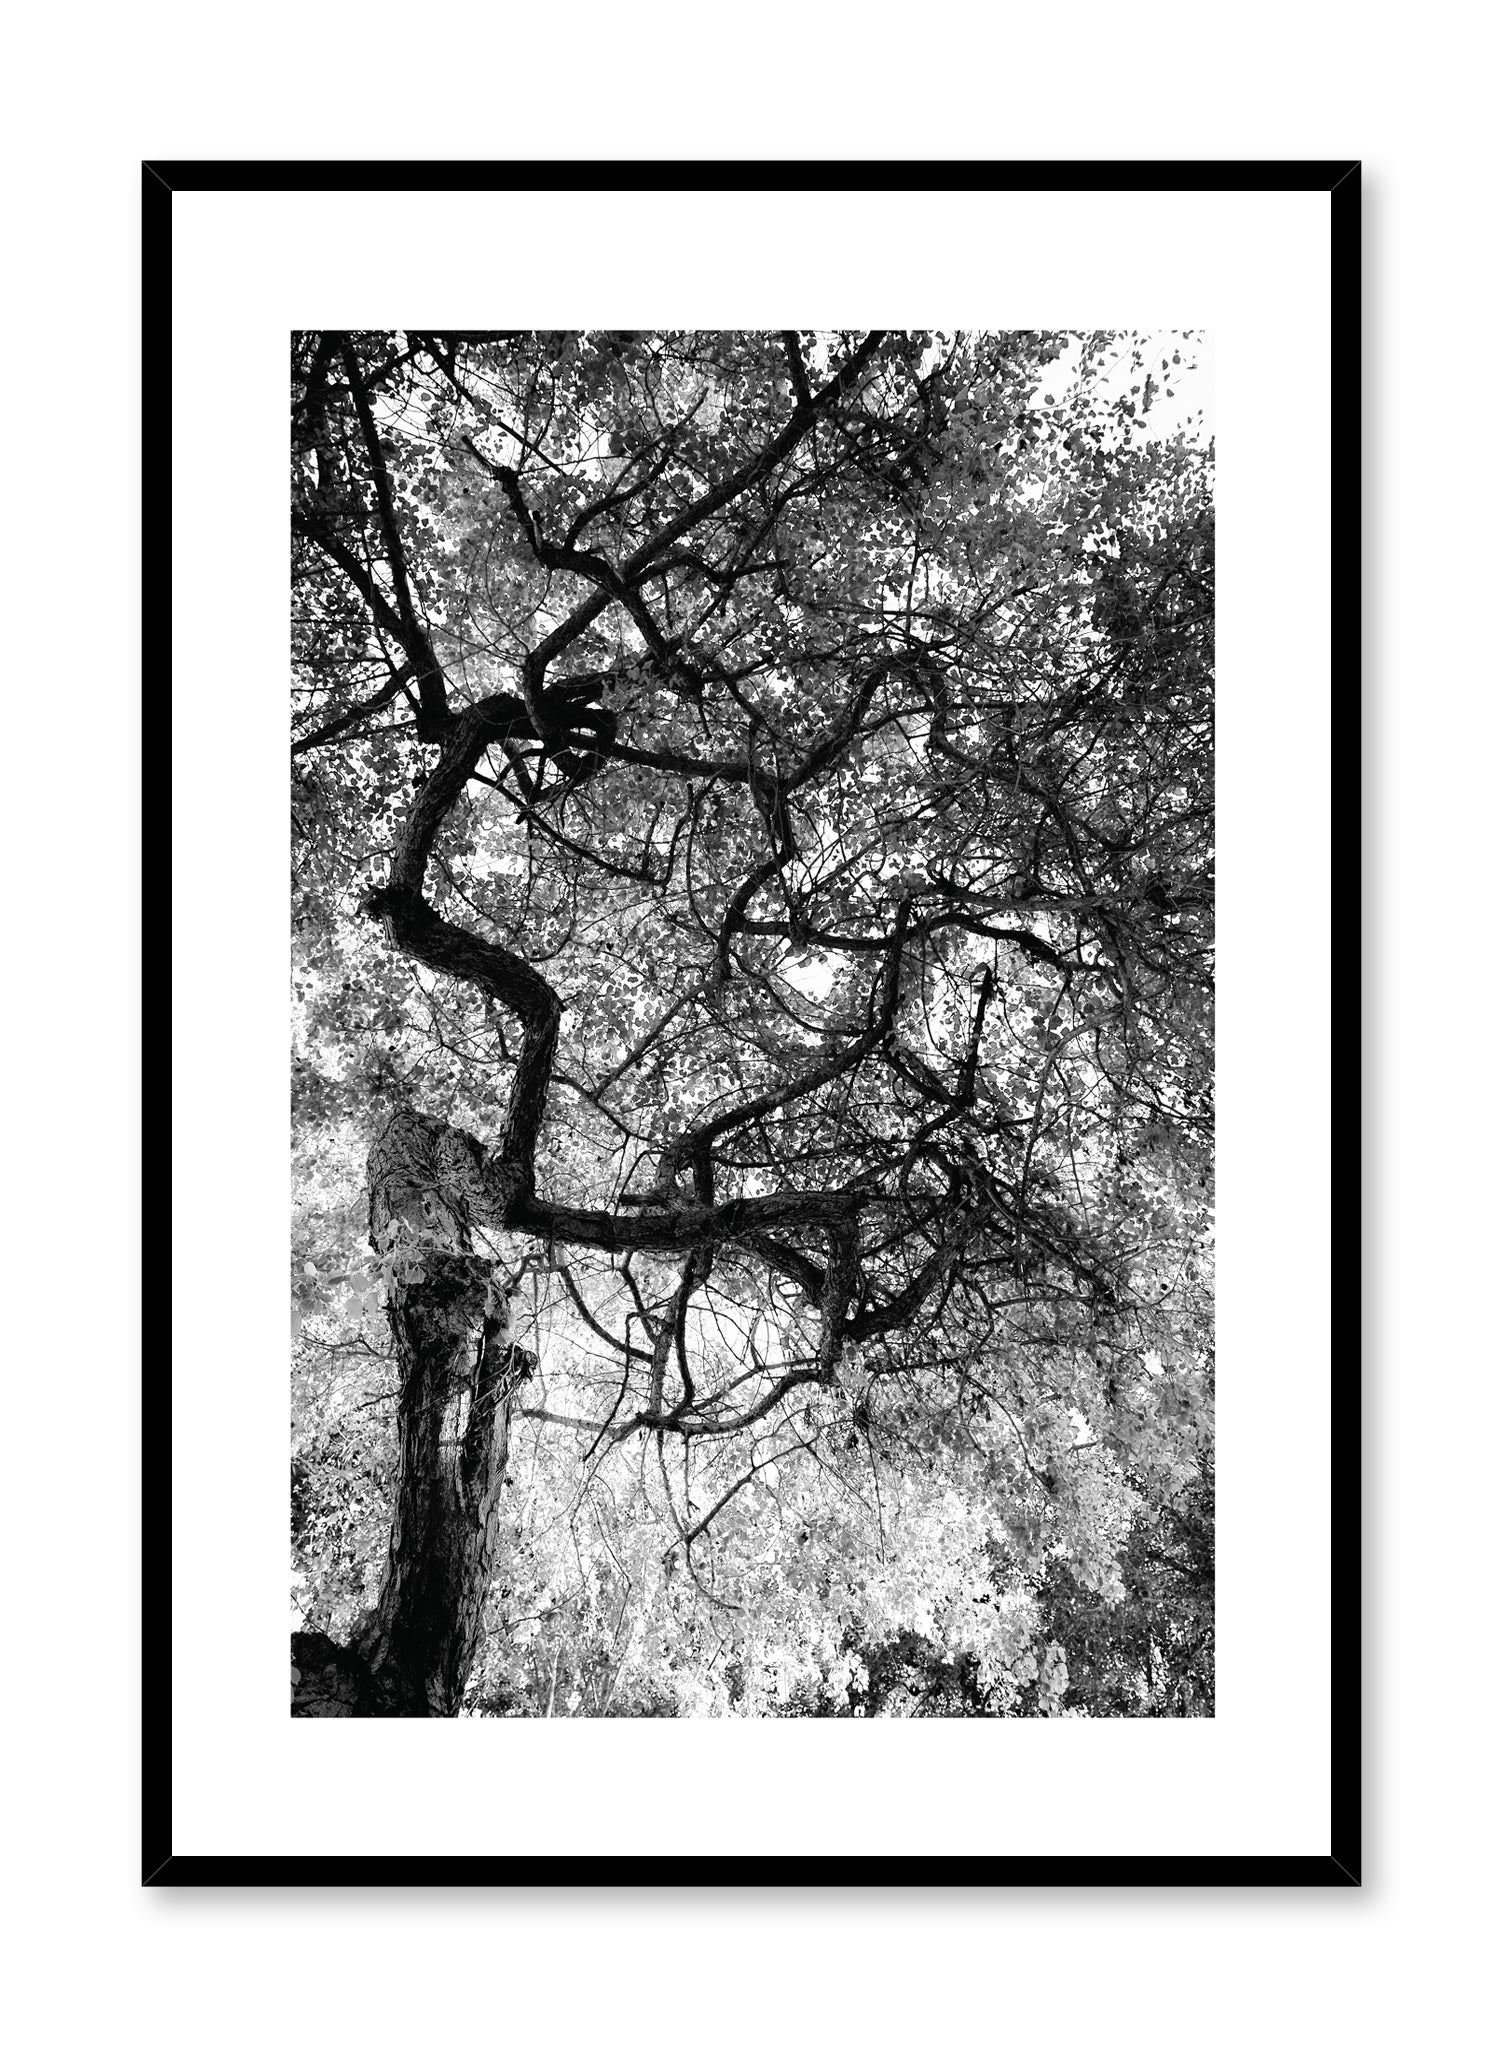 Modern minimalist poster by Opposite Wall with black and white photography of dense foliage